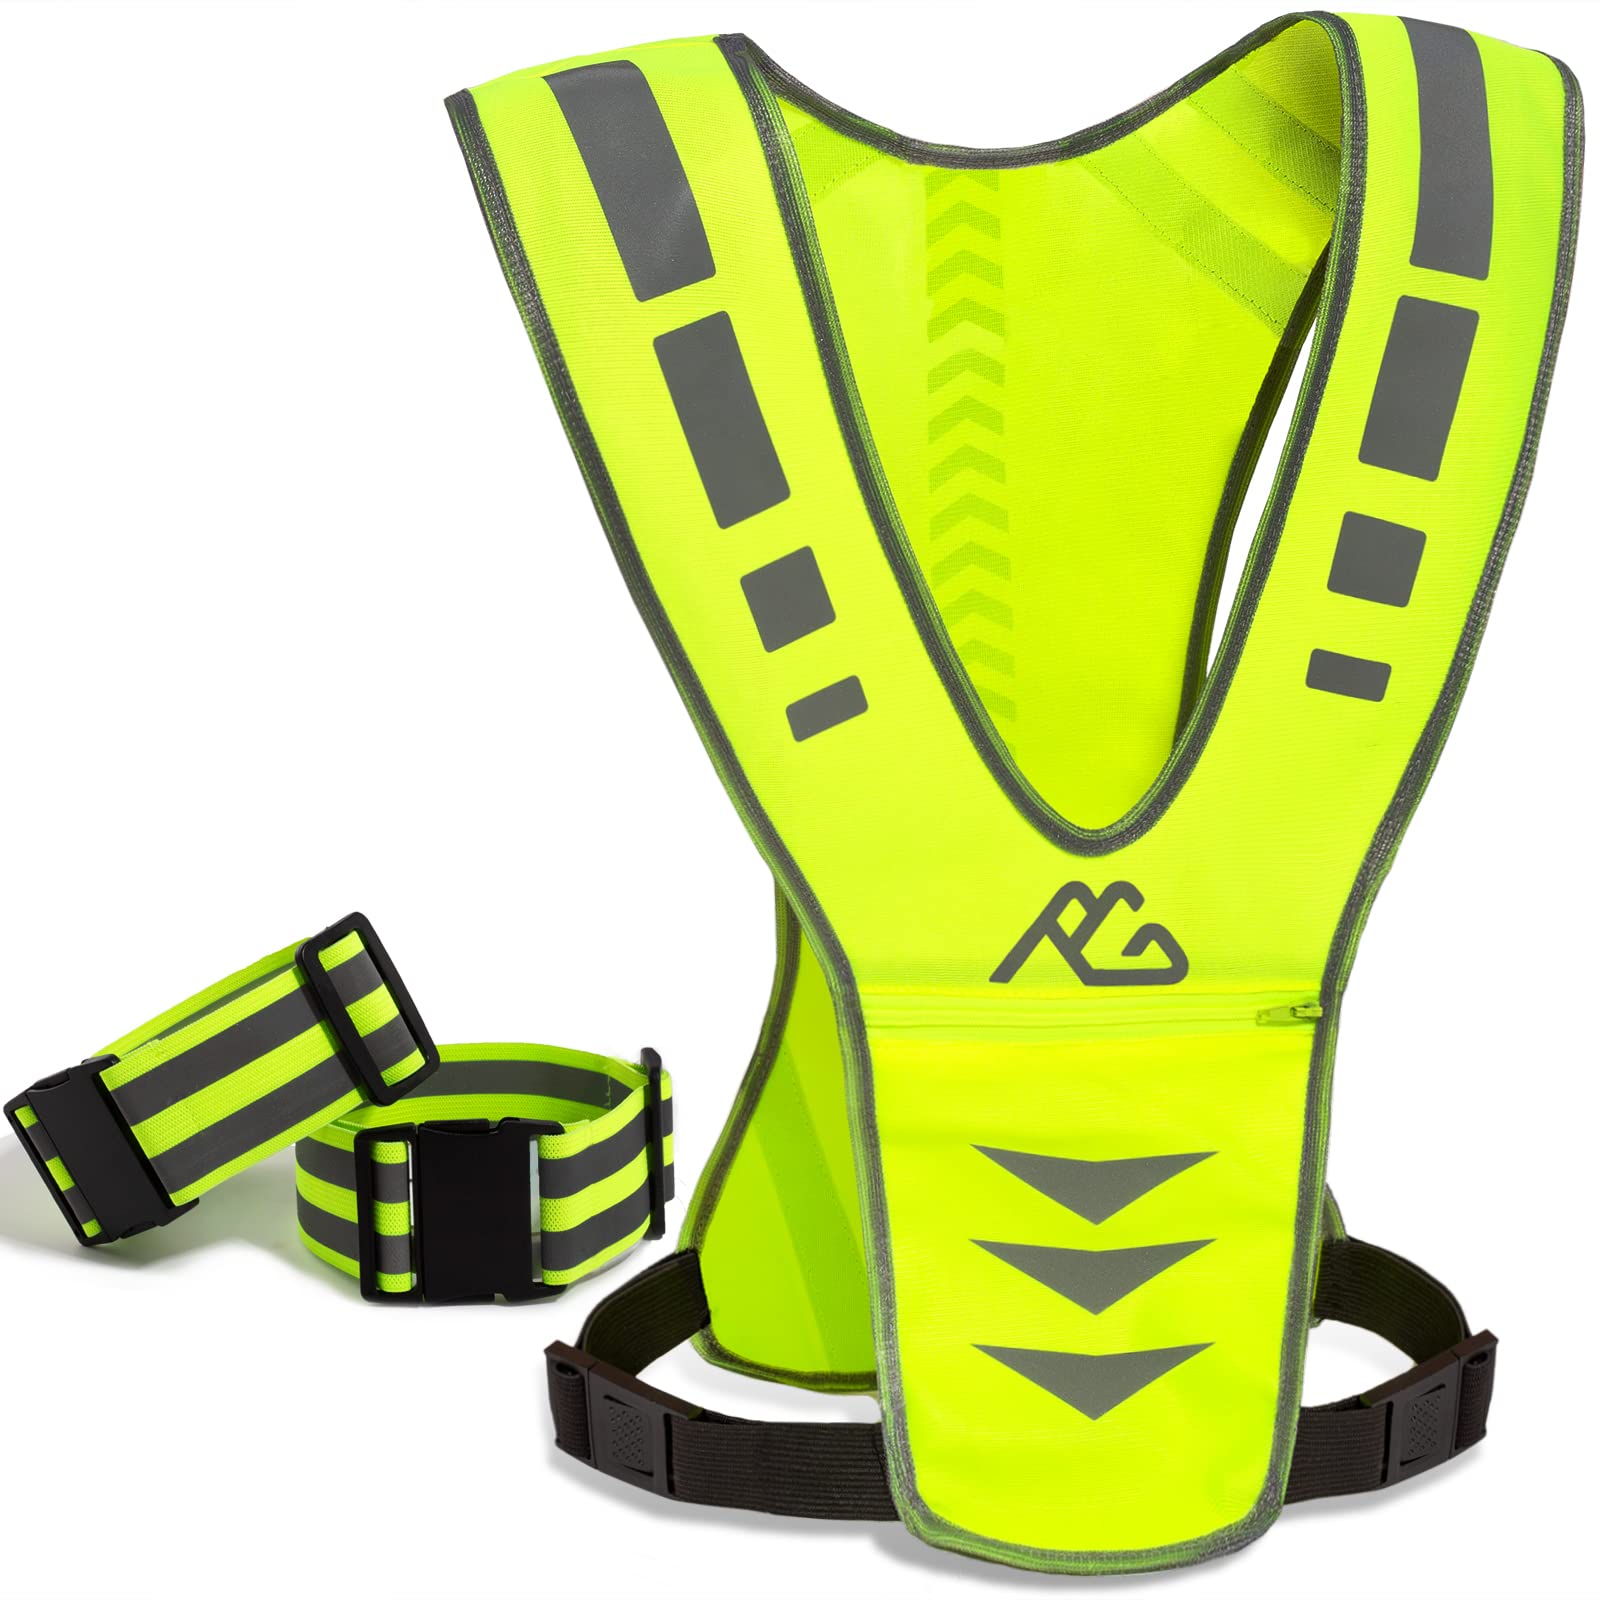 GoxRunx Reflective Running Vest Gear with Reflective Bands for Women Men Safety  Reflective Vest for Walking